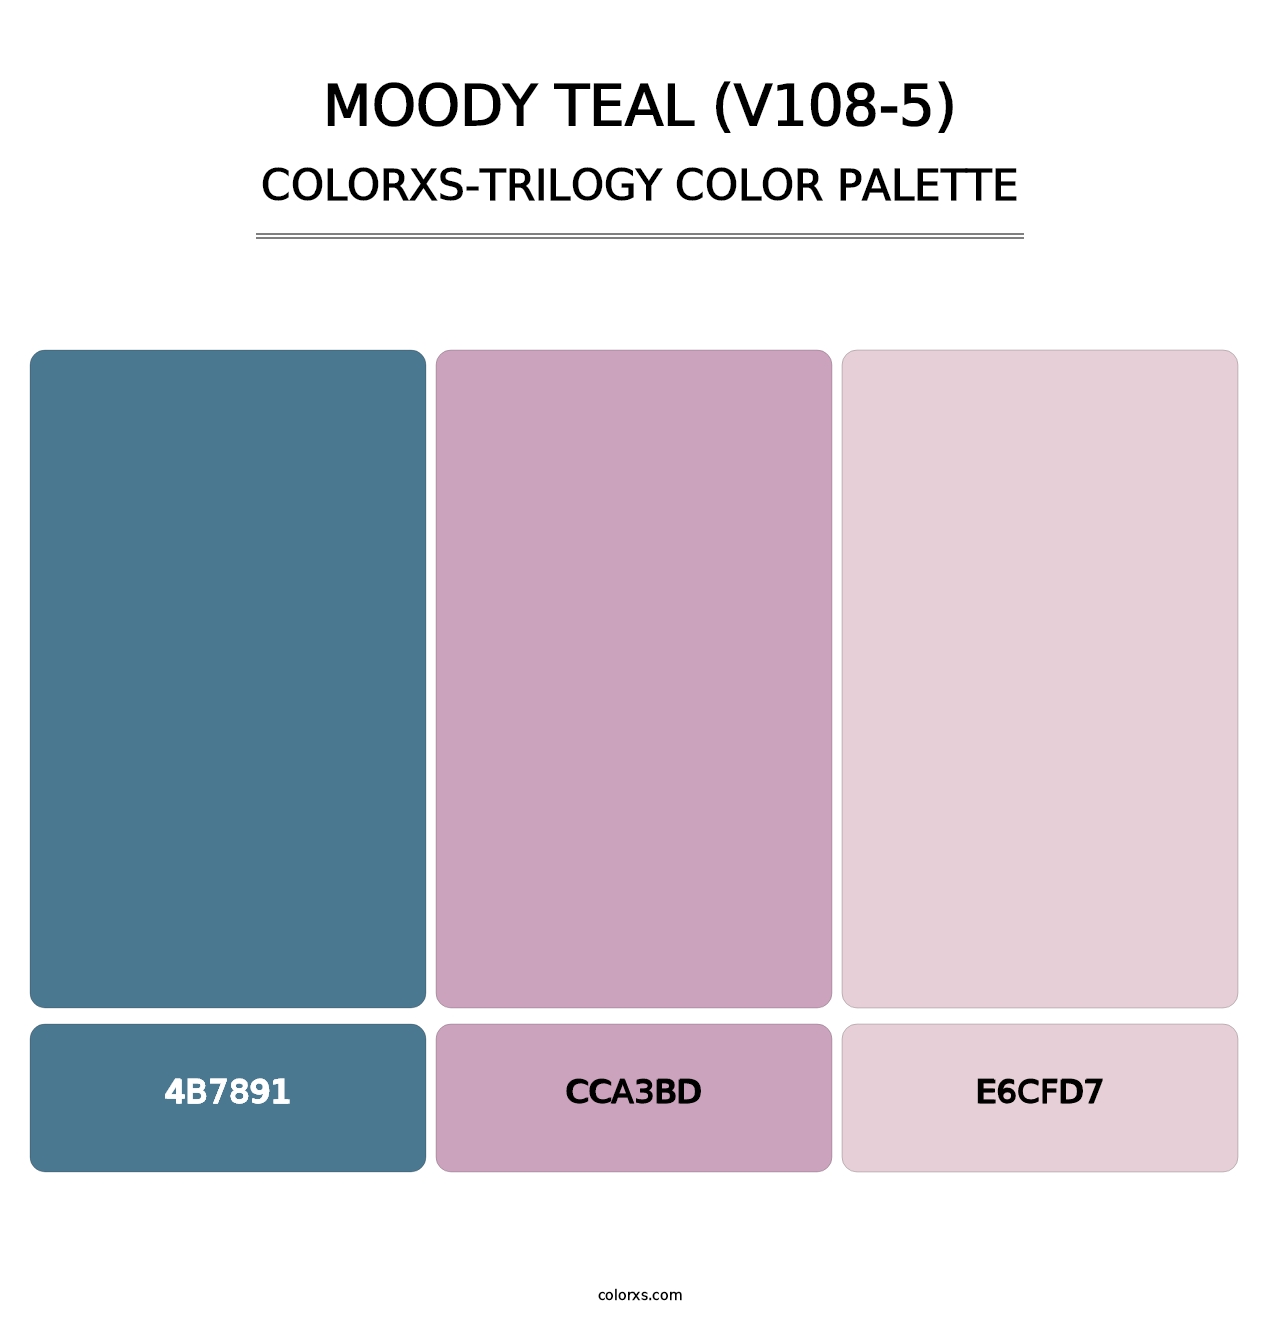 Moody Teal (V108-5) - Colorxs Trilogy Palette